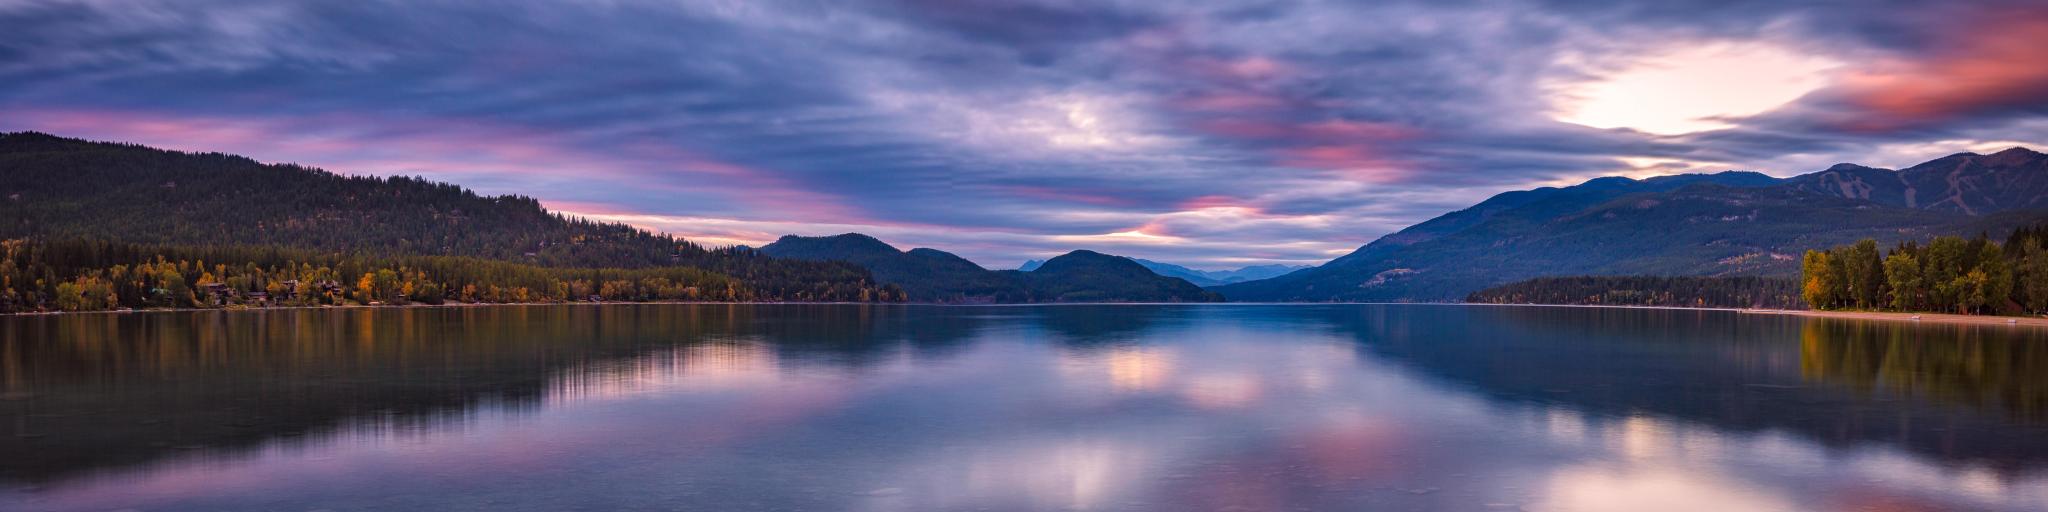 Whitefish Lake, Montana with a stunning sunset sky of pinks and purples, mountains in the distance reflecting in the water and green land either side.